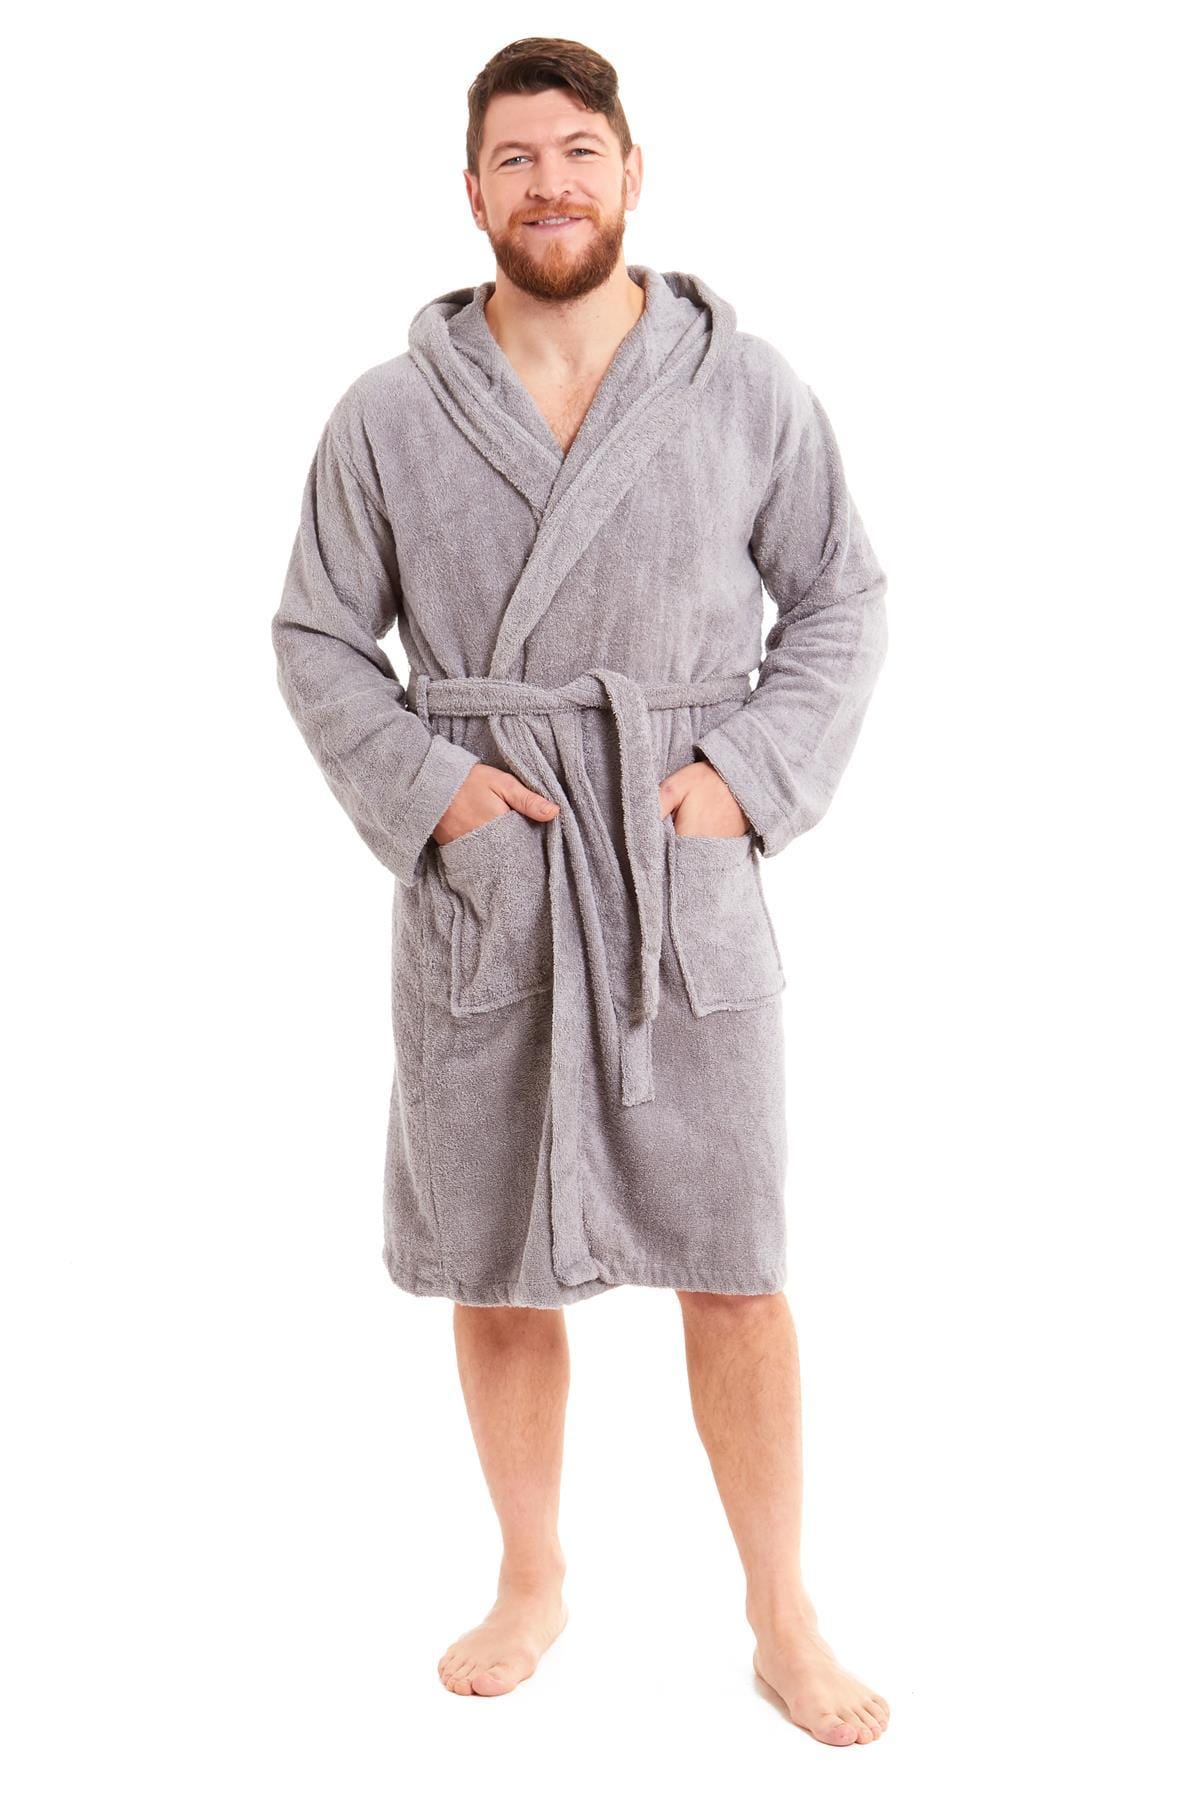 Men's Luxury Velour Towel Dressing Gown – Afford The Style